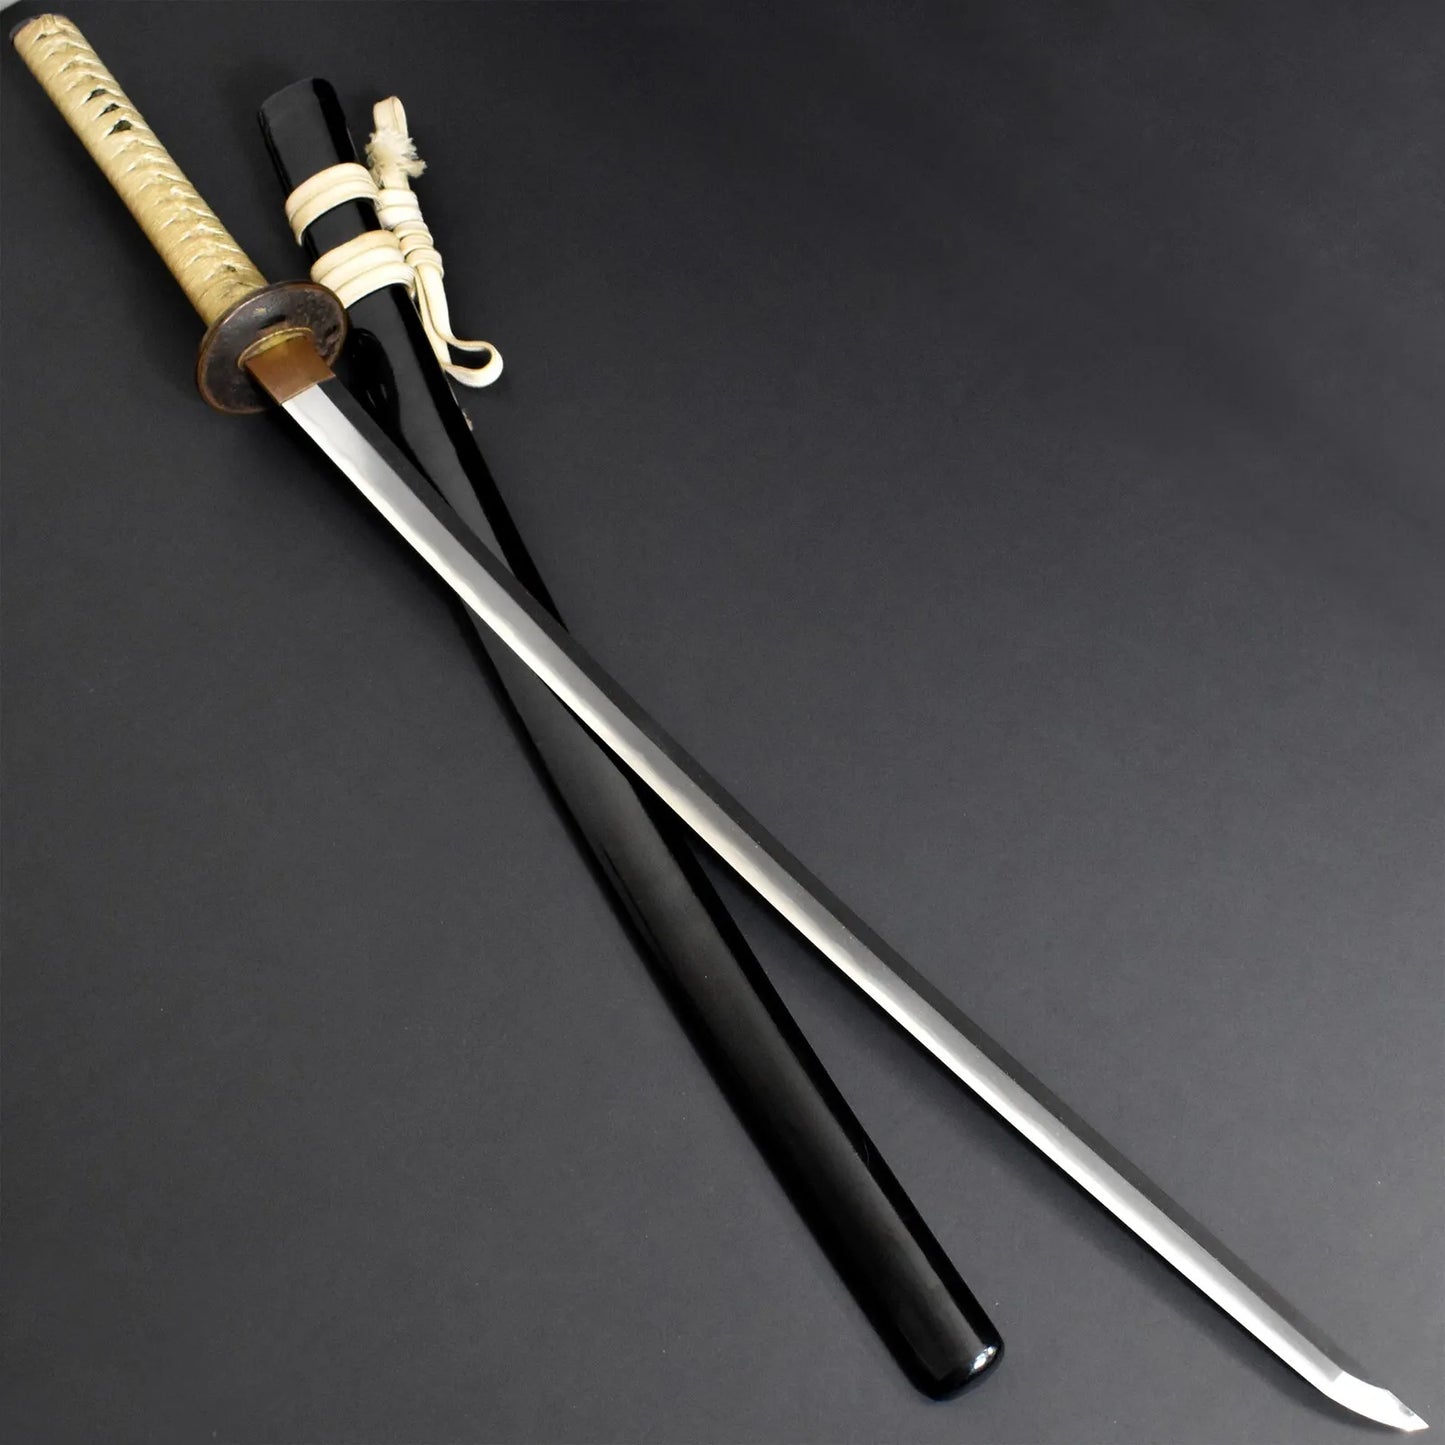 Mastercrafted Authentic Old Nihonto Japanese Katana Signed Samurai Sword Collectible Weapon Martial Legacy.